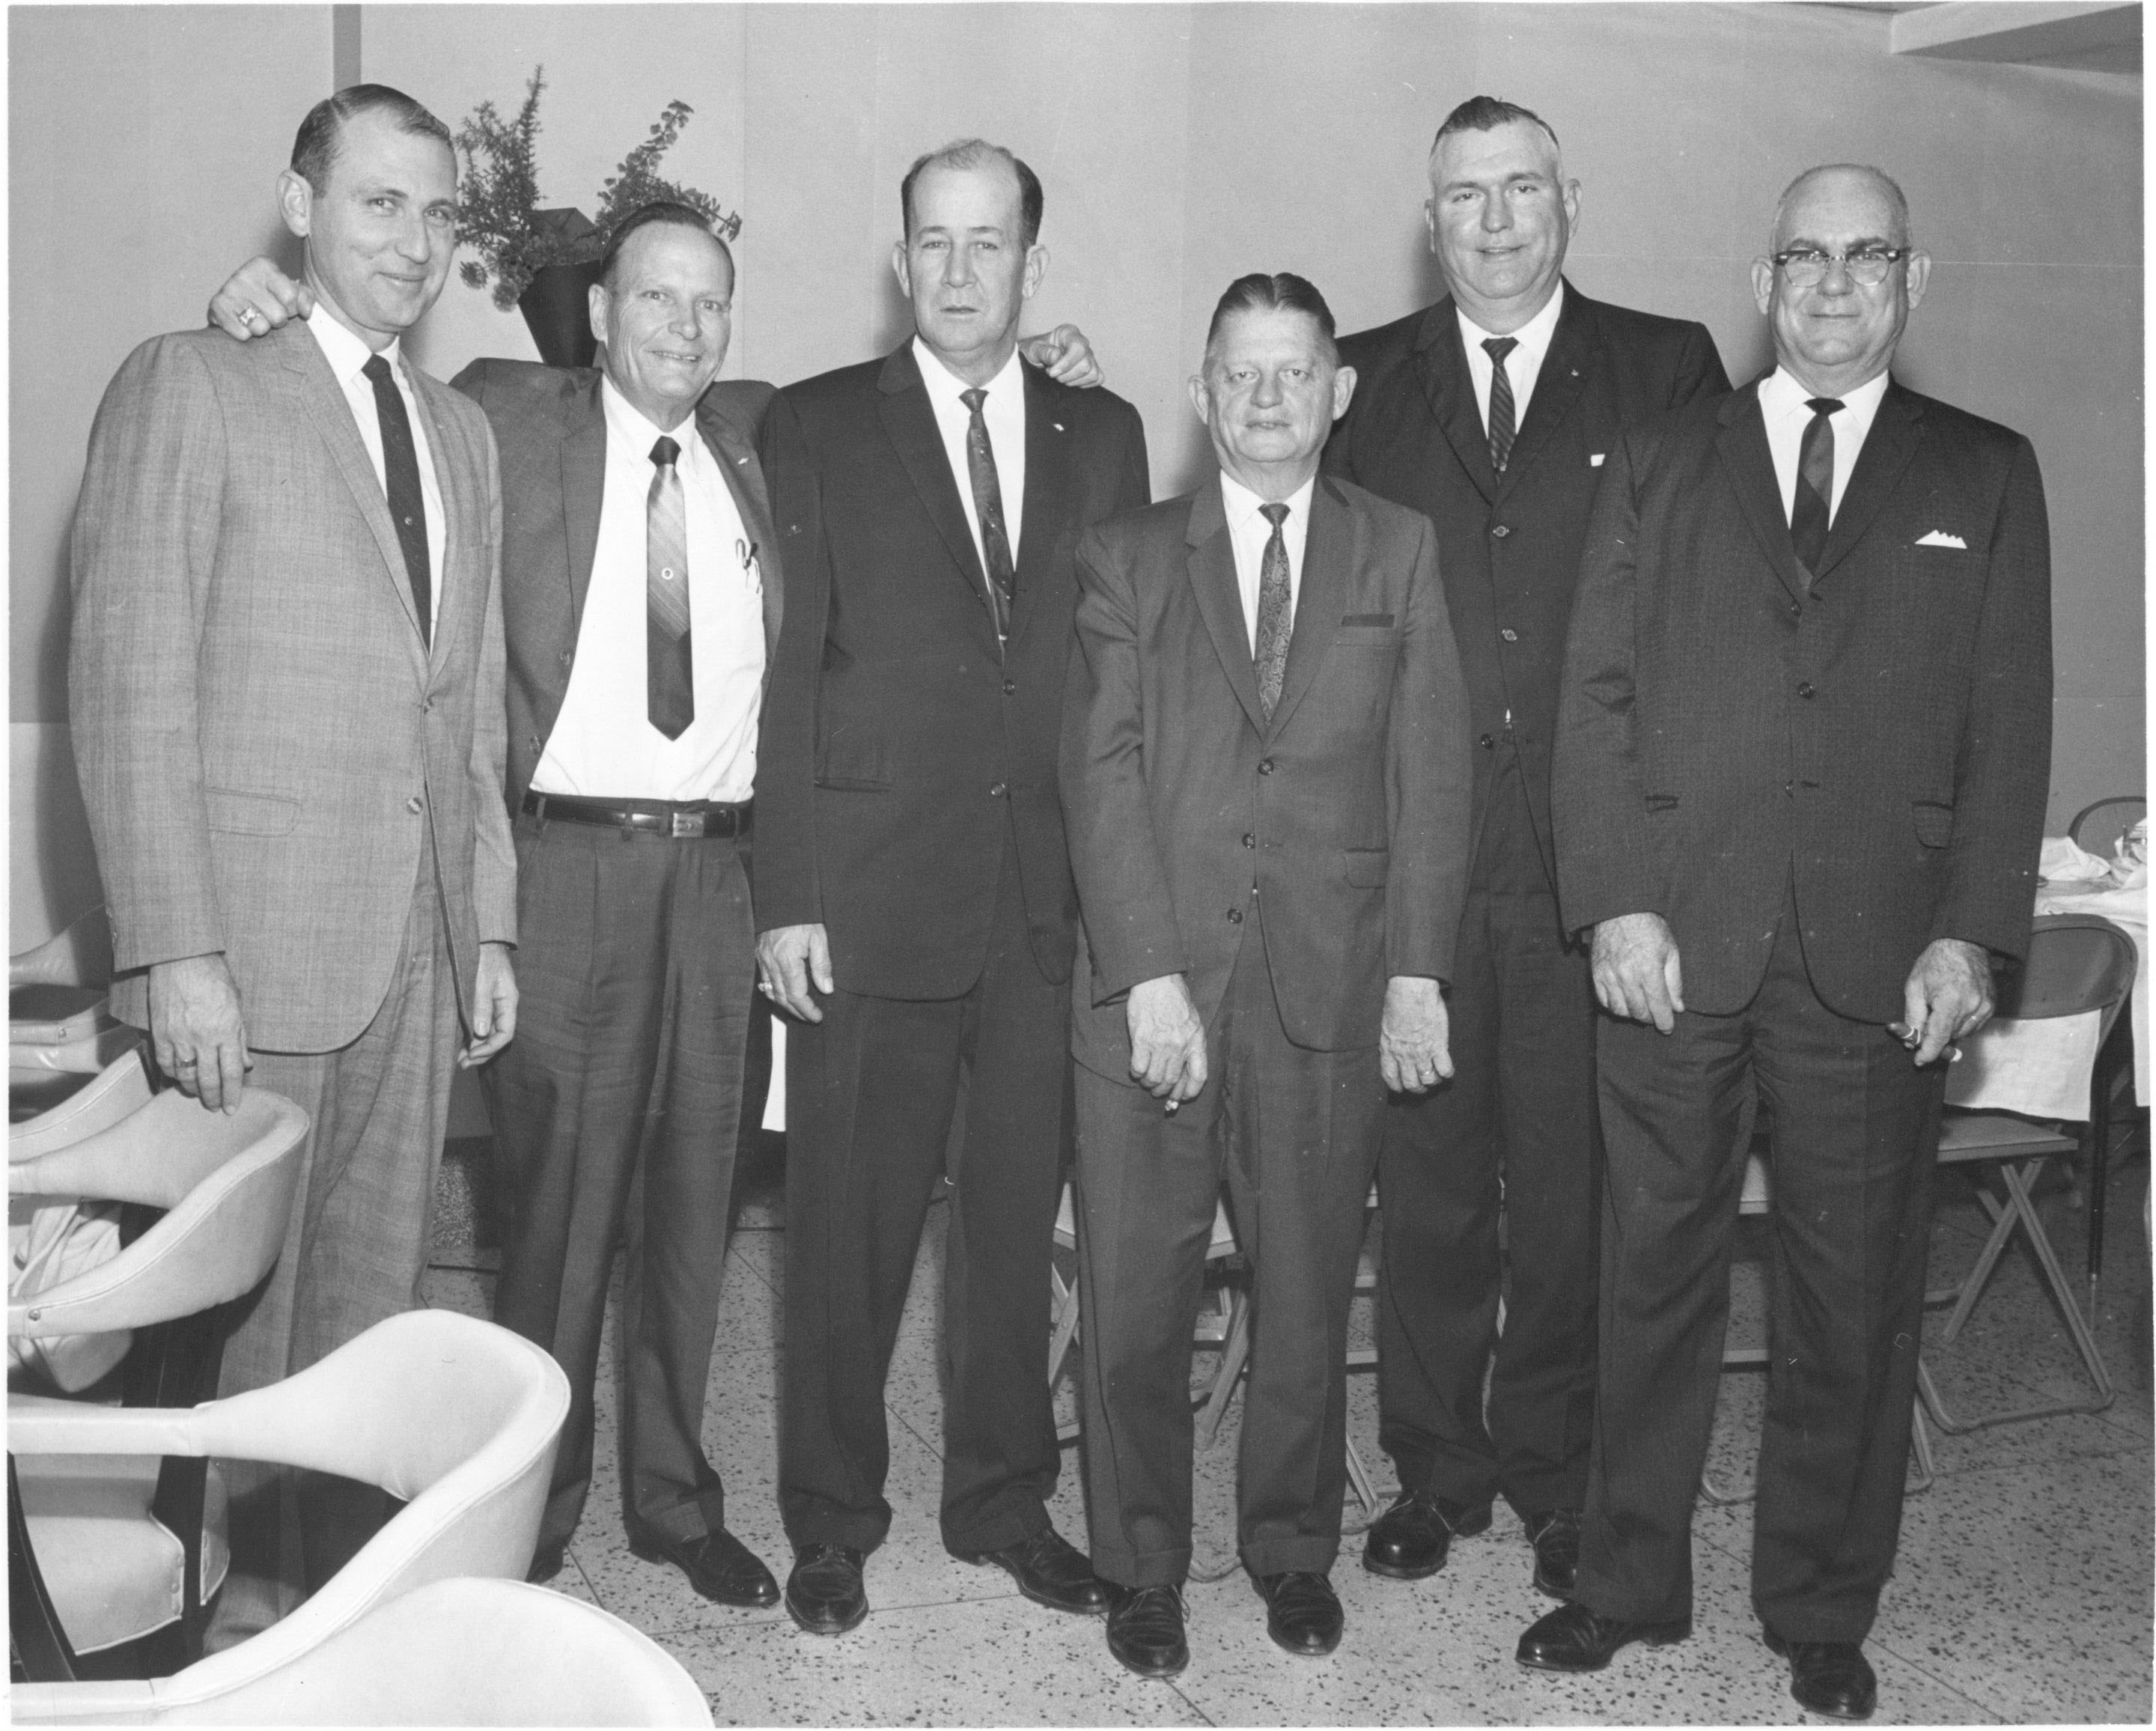 Group of men in suits and ties